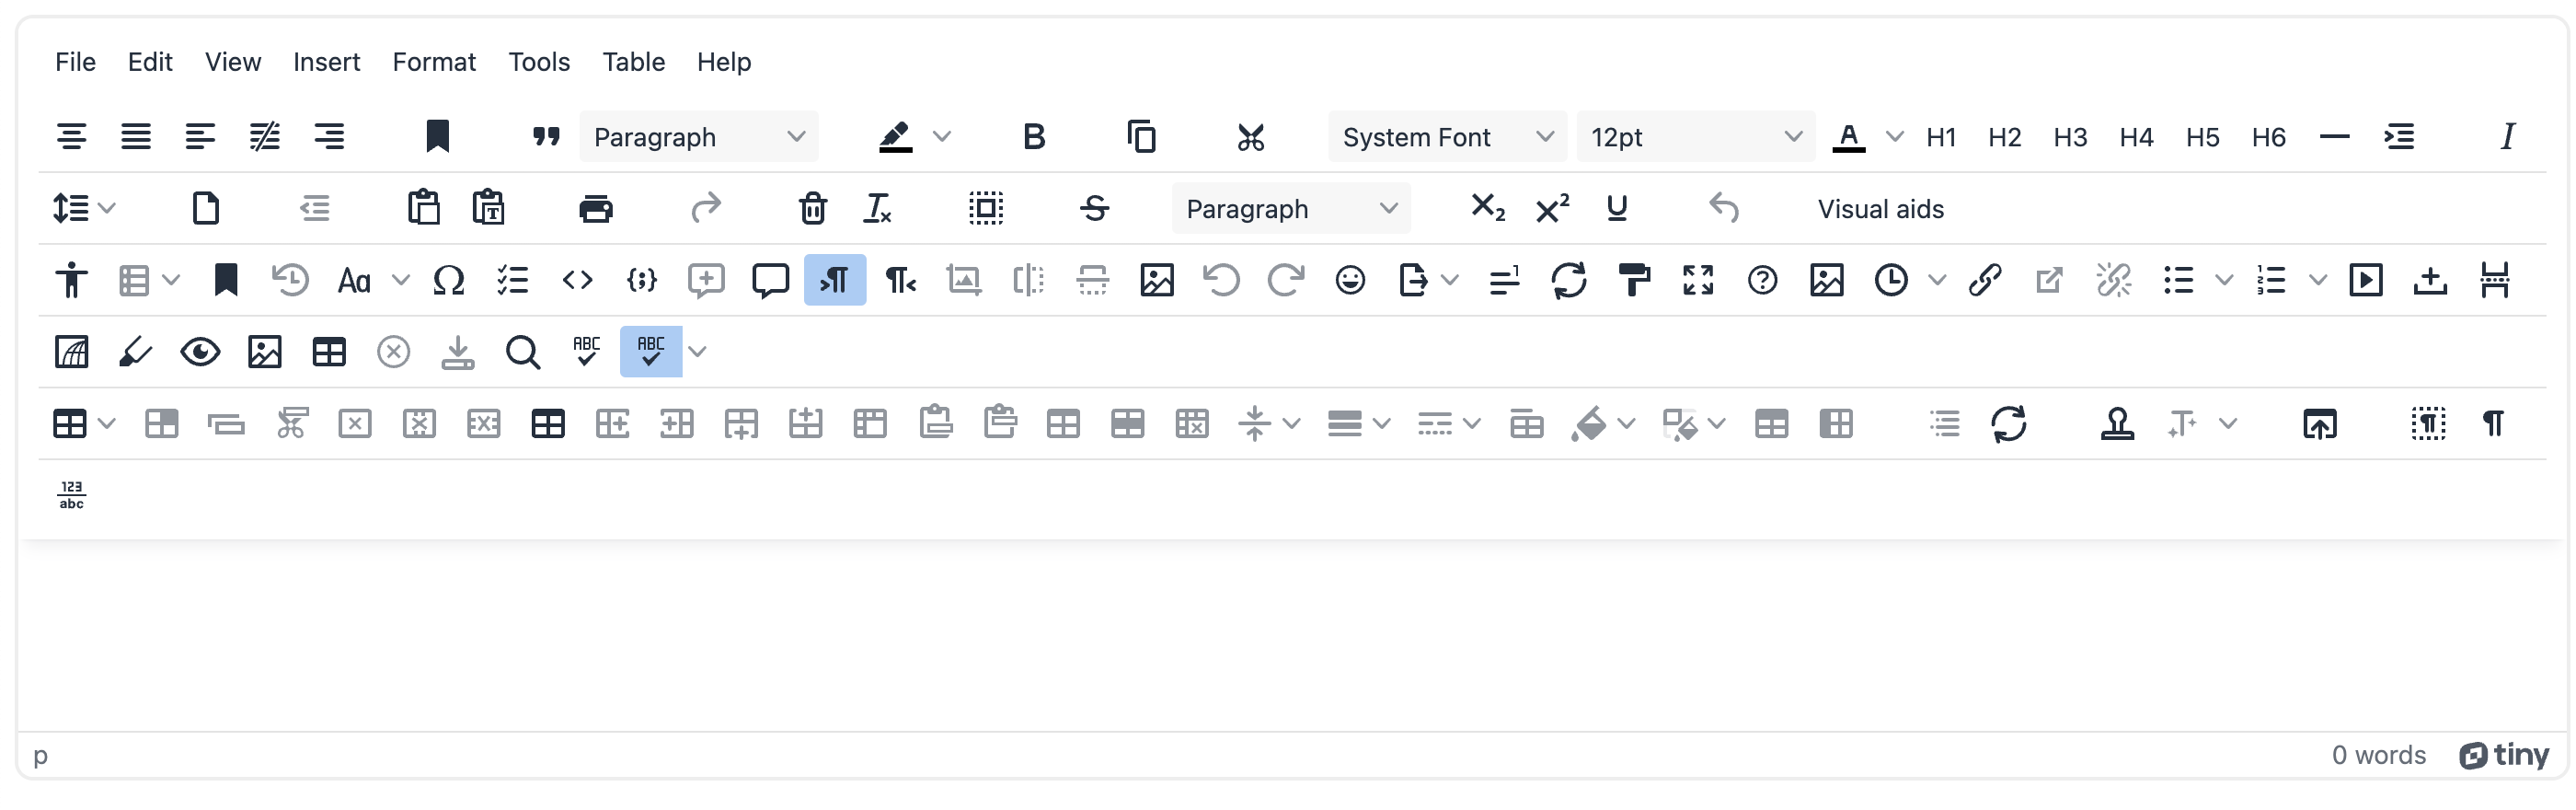 All toolbar icons showing in the browser for the TinyMCE demo